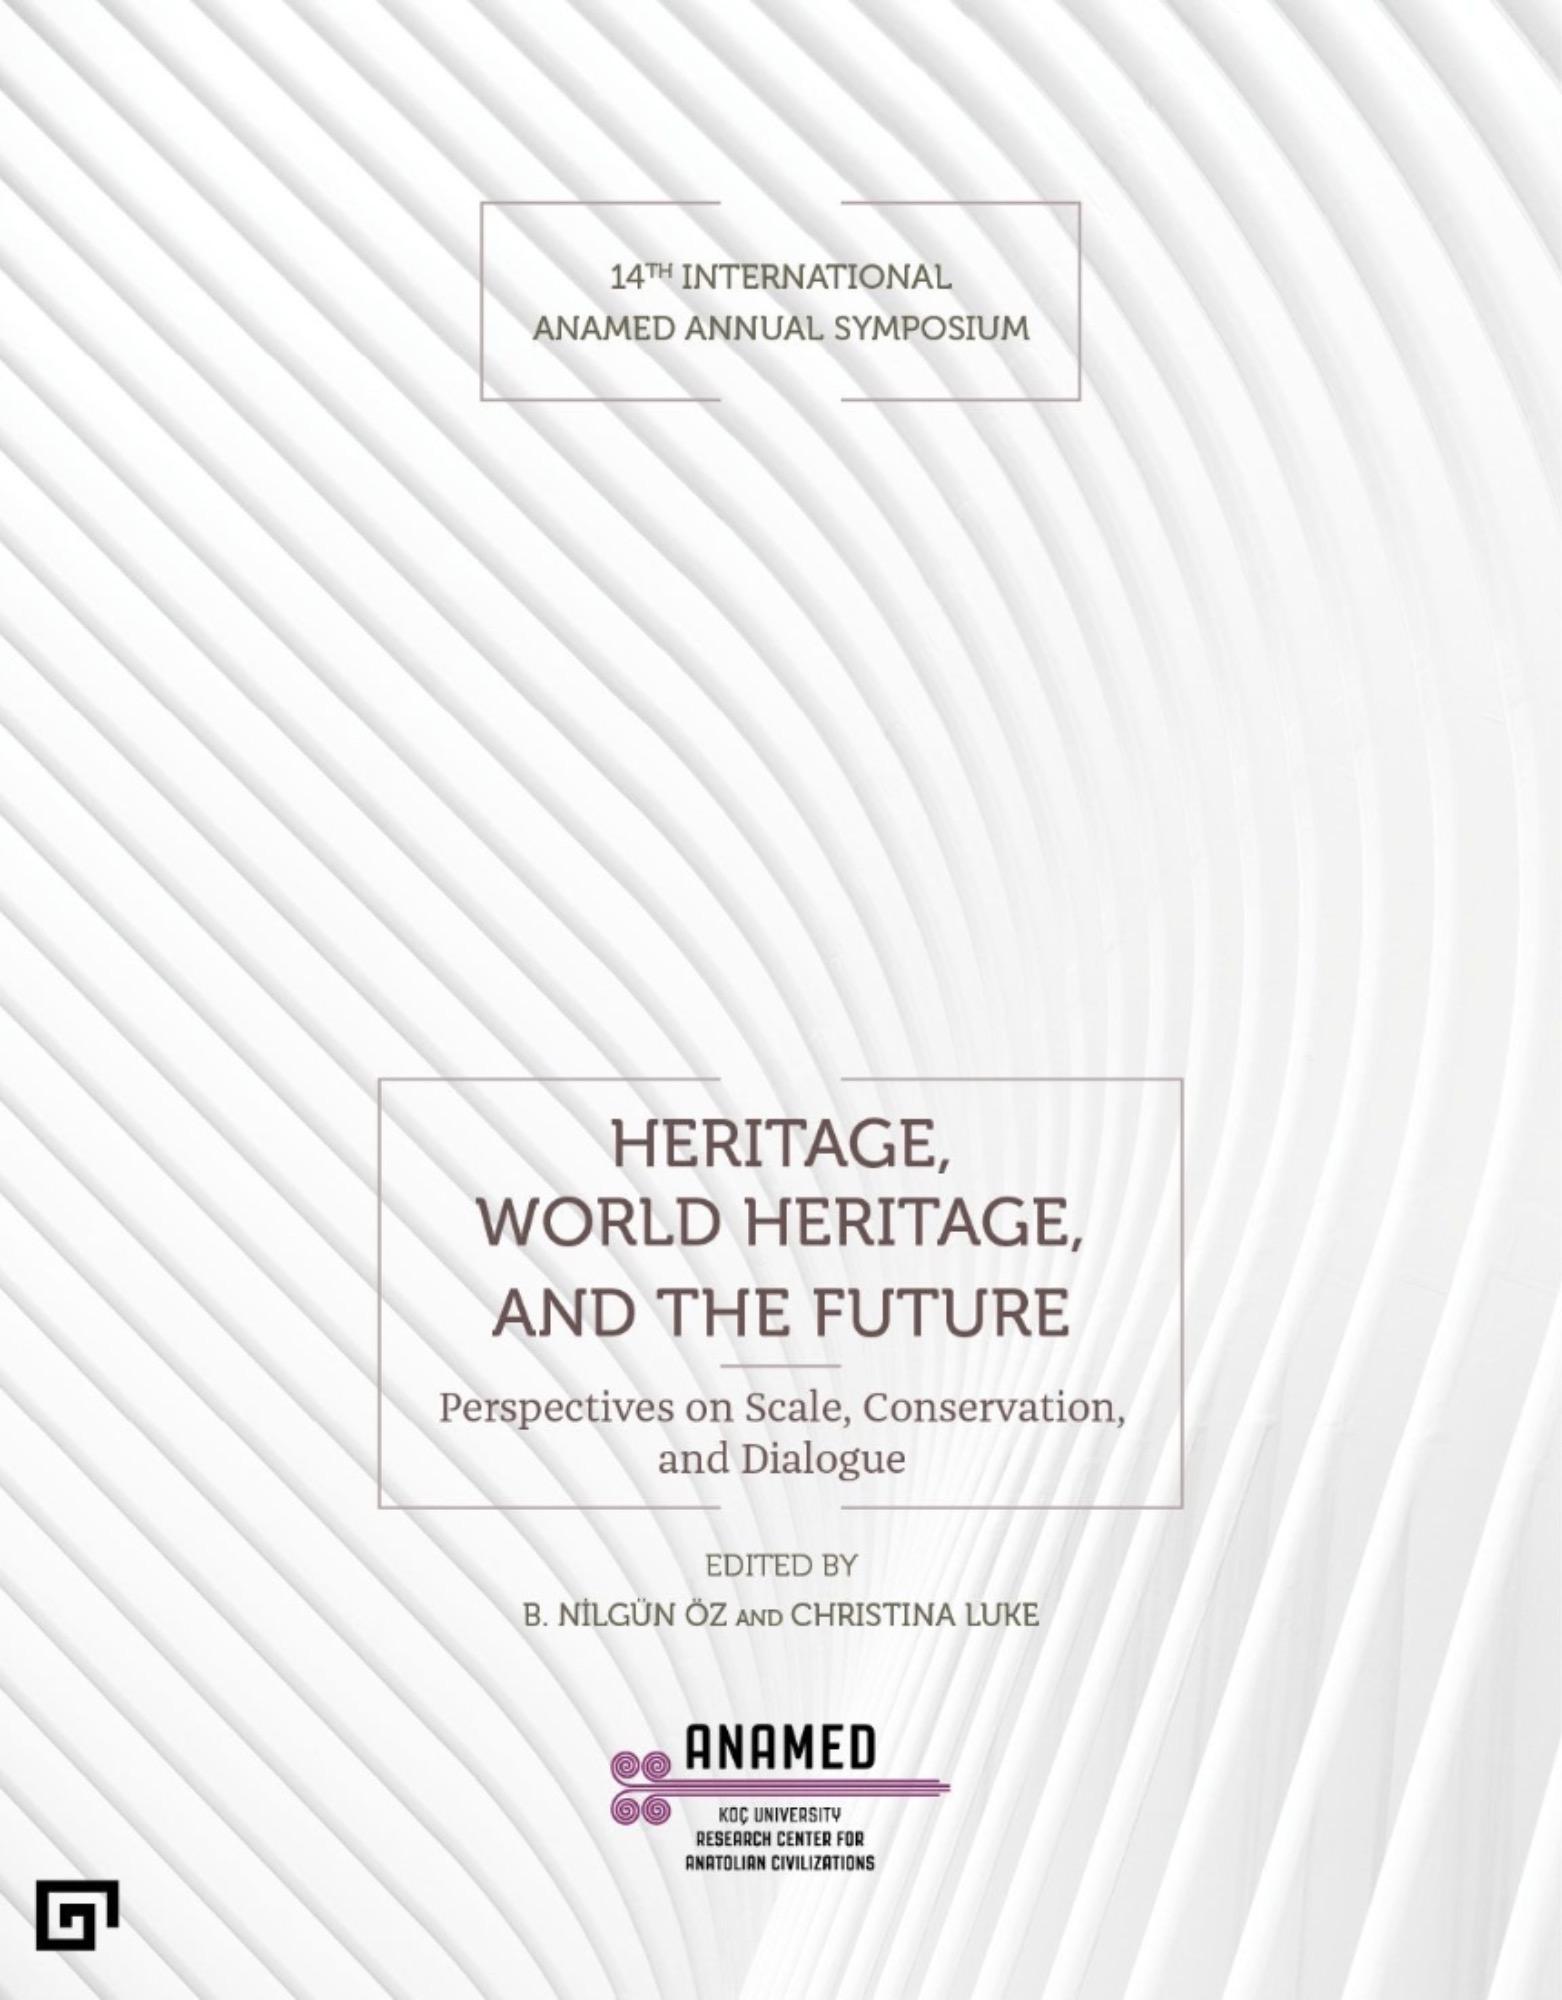 Nilgün Öz, B. – Christina Luke : Heritage, World Heritage, and the Future. Perspectives on Scale, Conservation, and Dialogue